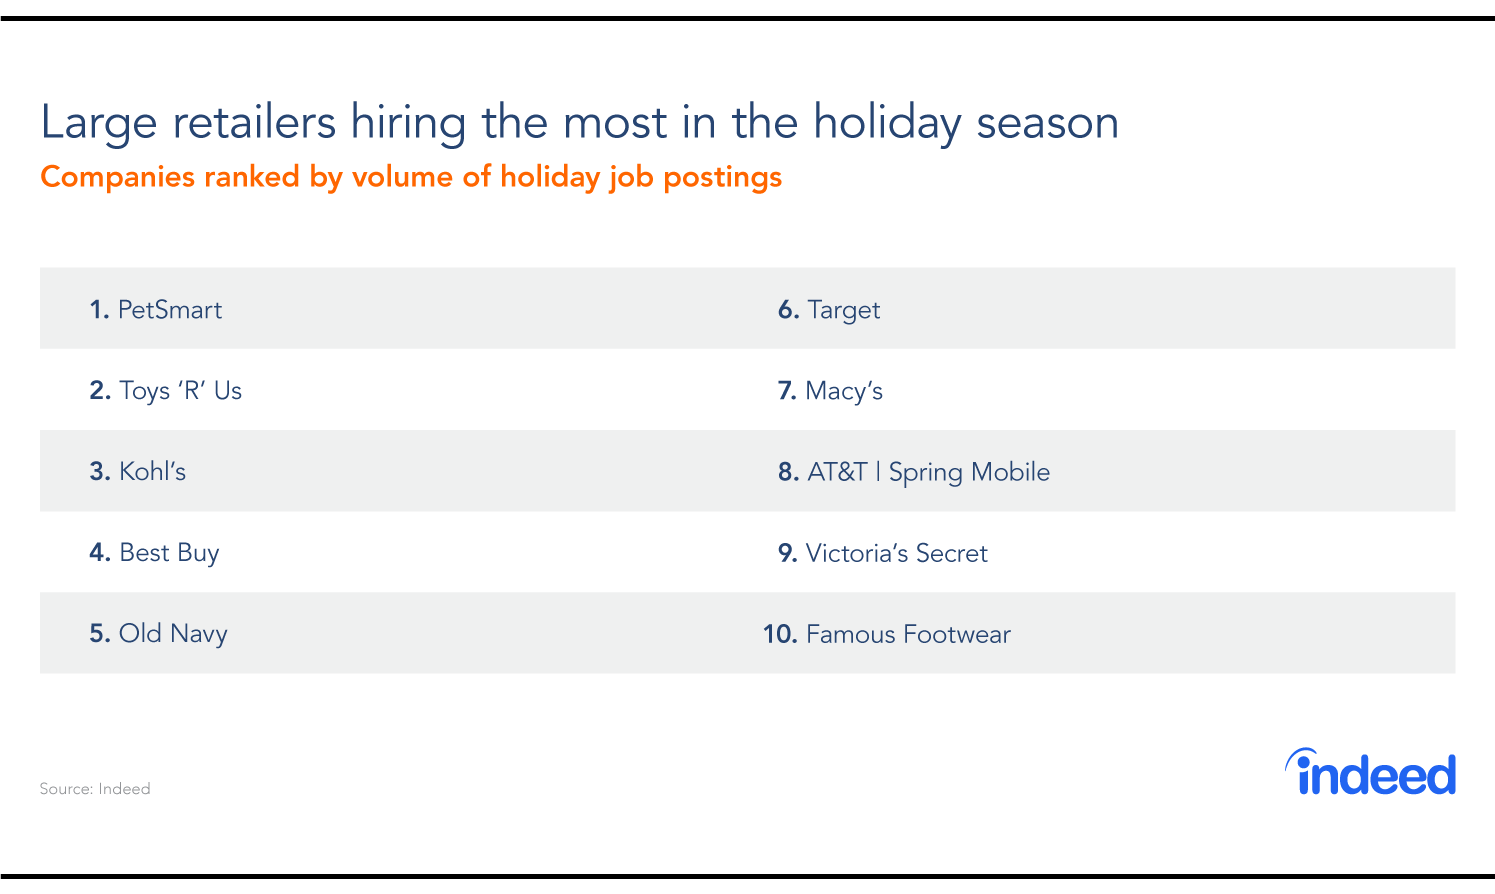 Large retailers hiring the most in the holiday season